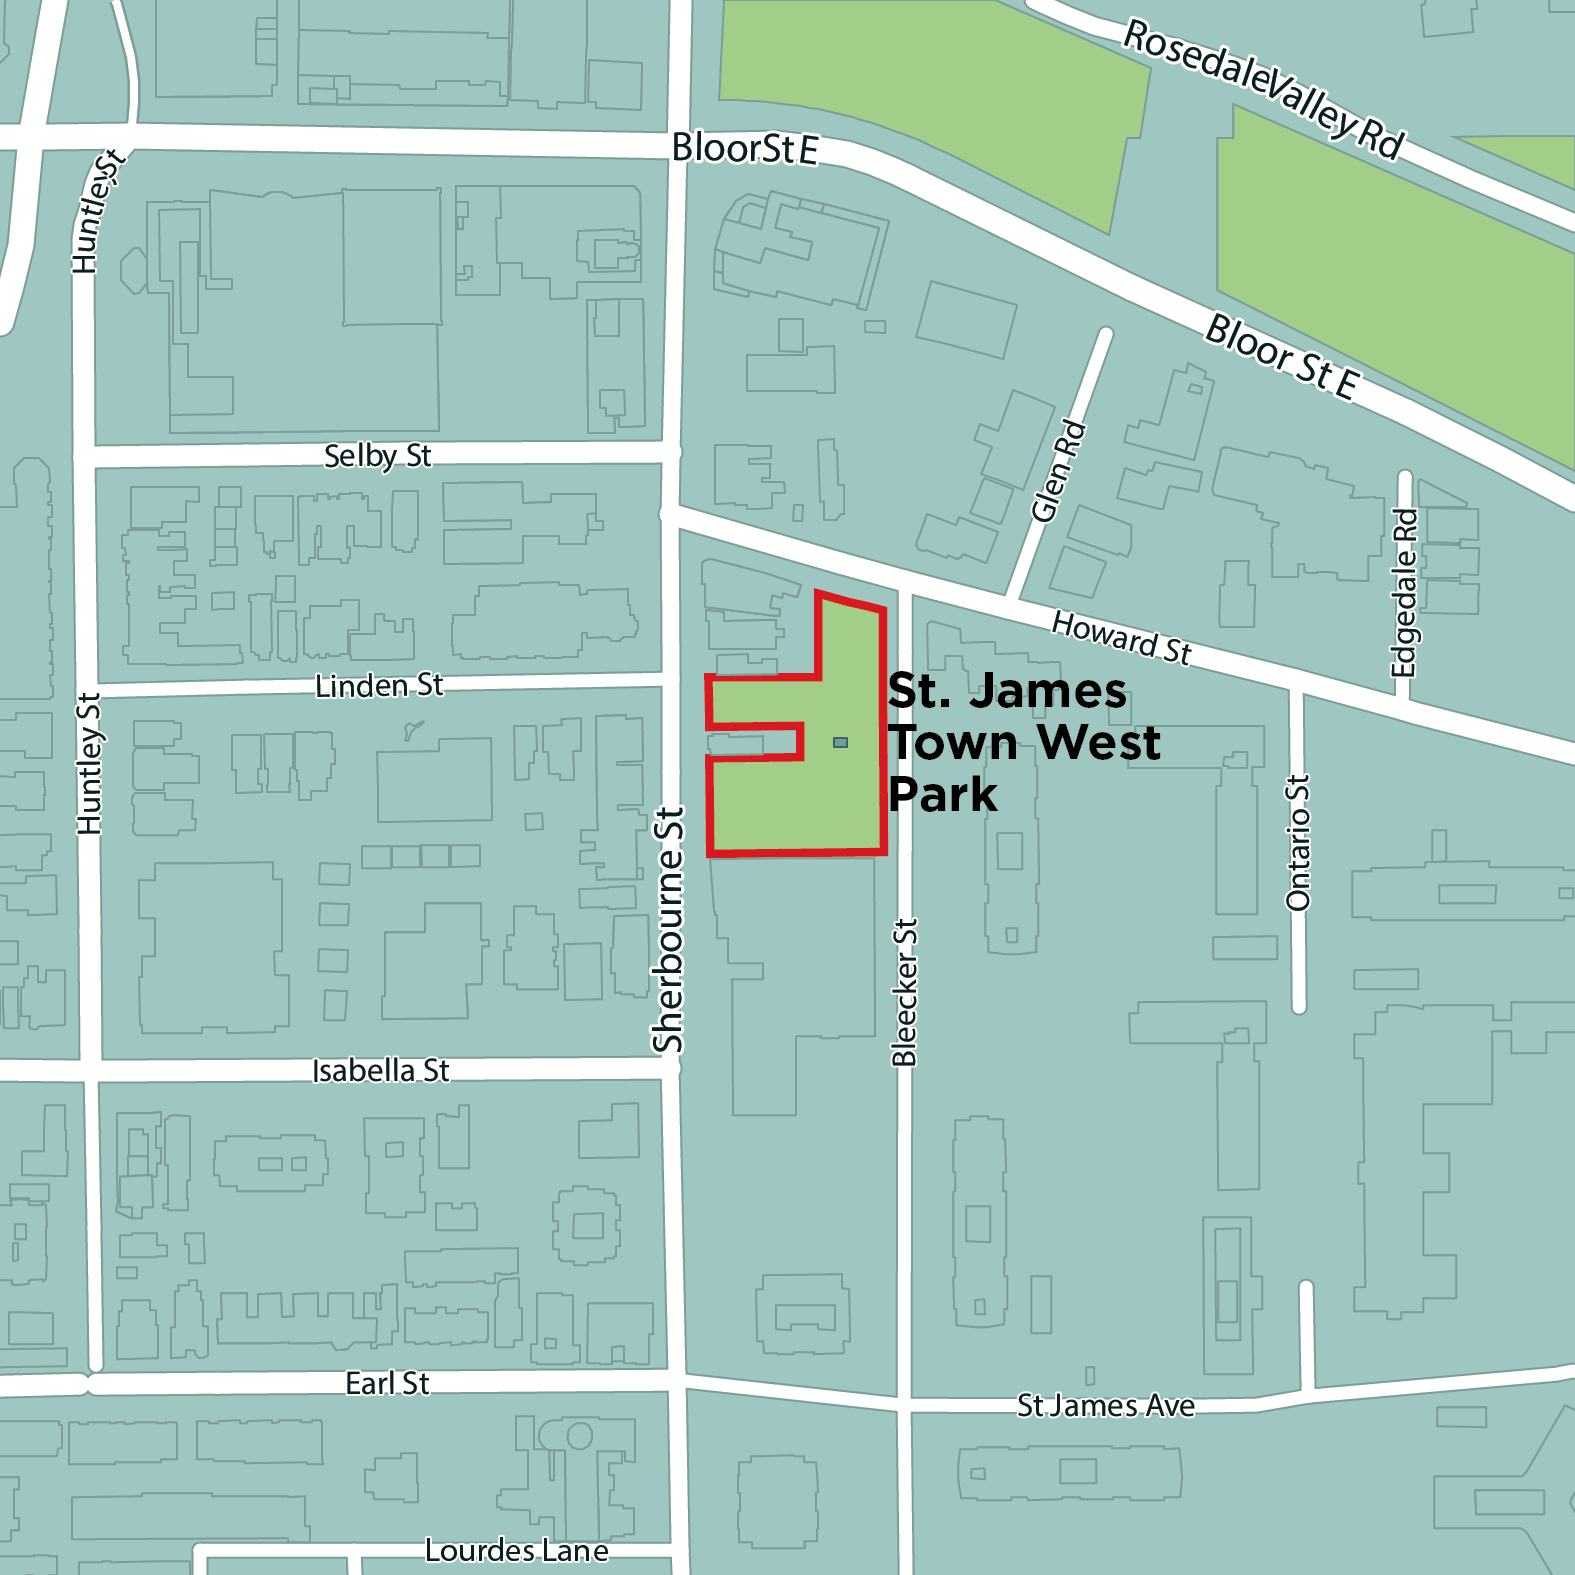 Aerial map showing the location of St. James Town West Park, located south of Bloor Street and east of Sherbourne Street.